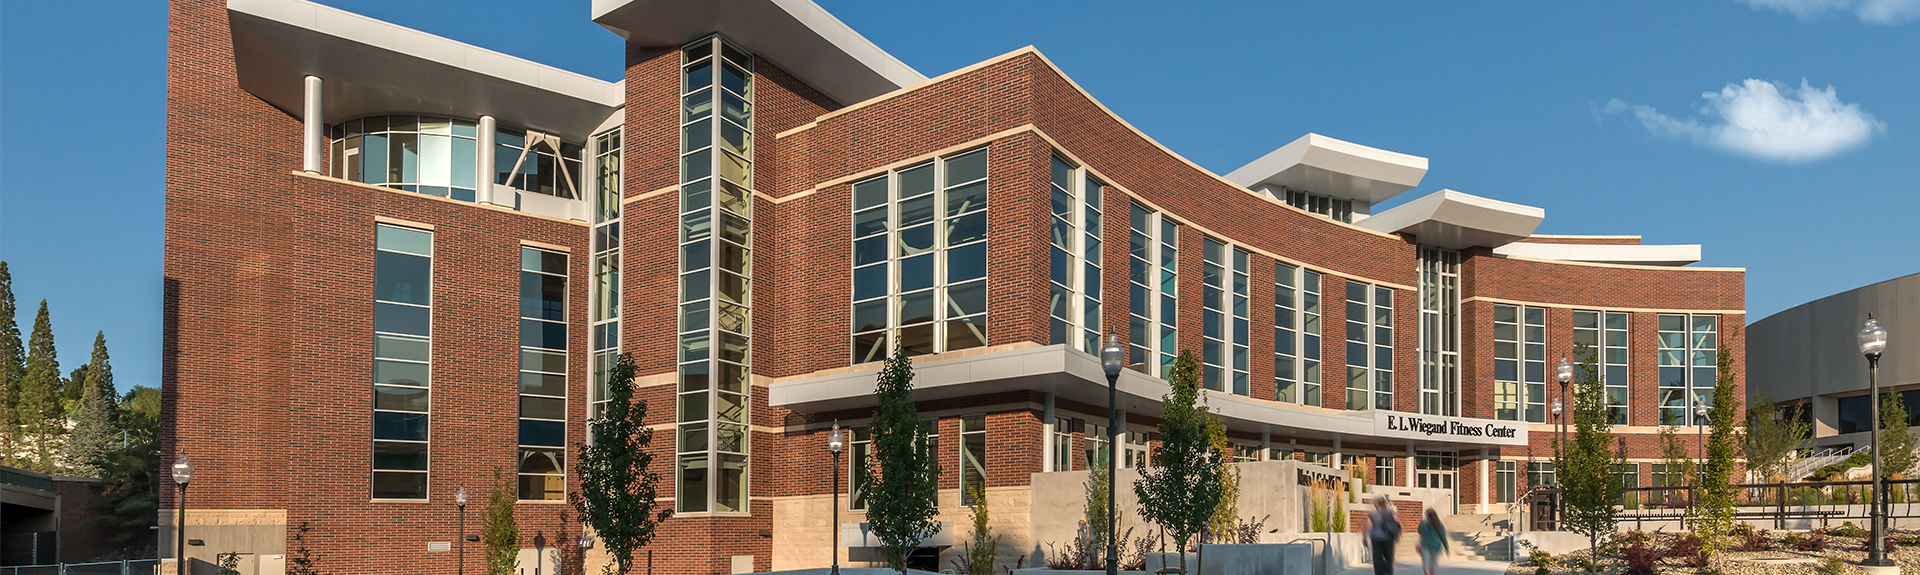 exterior of wiegand fitness center for students